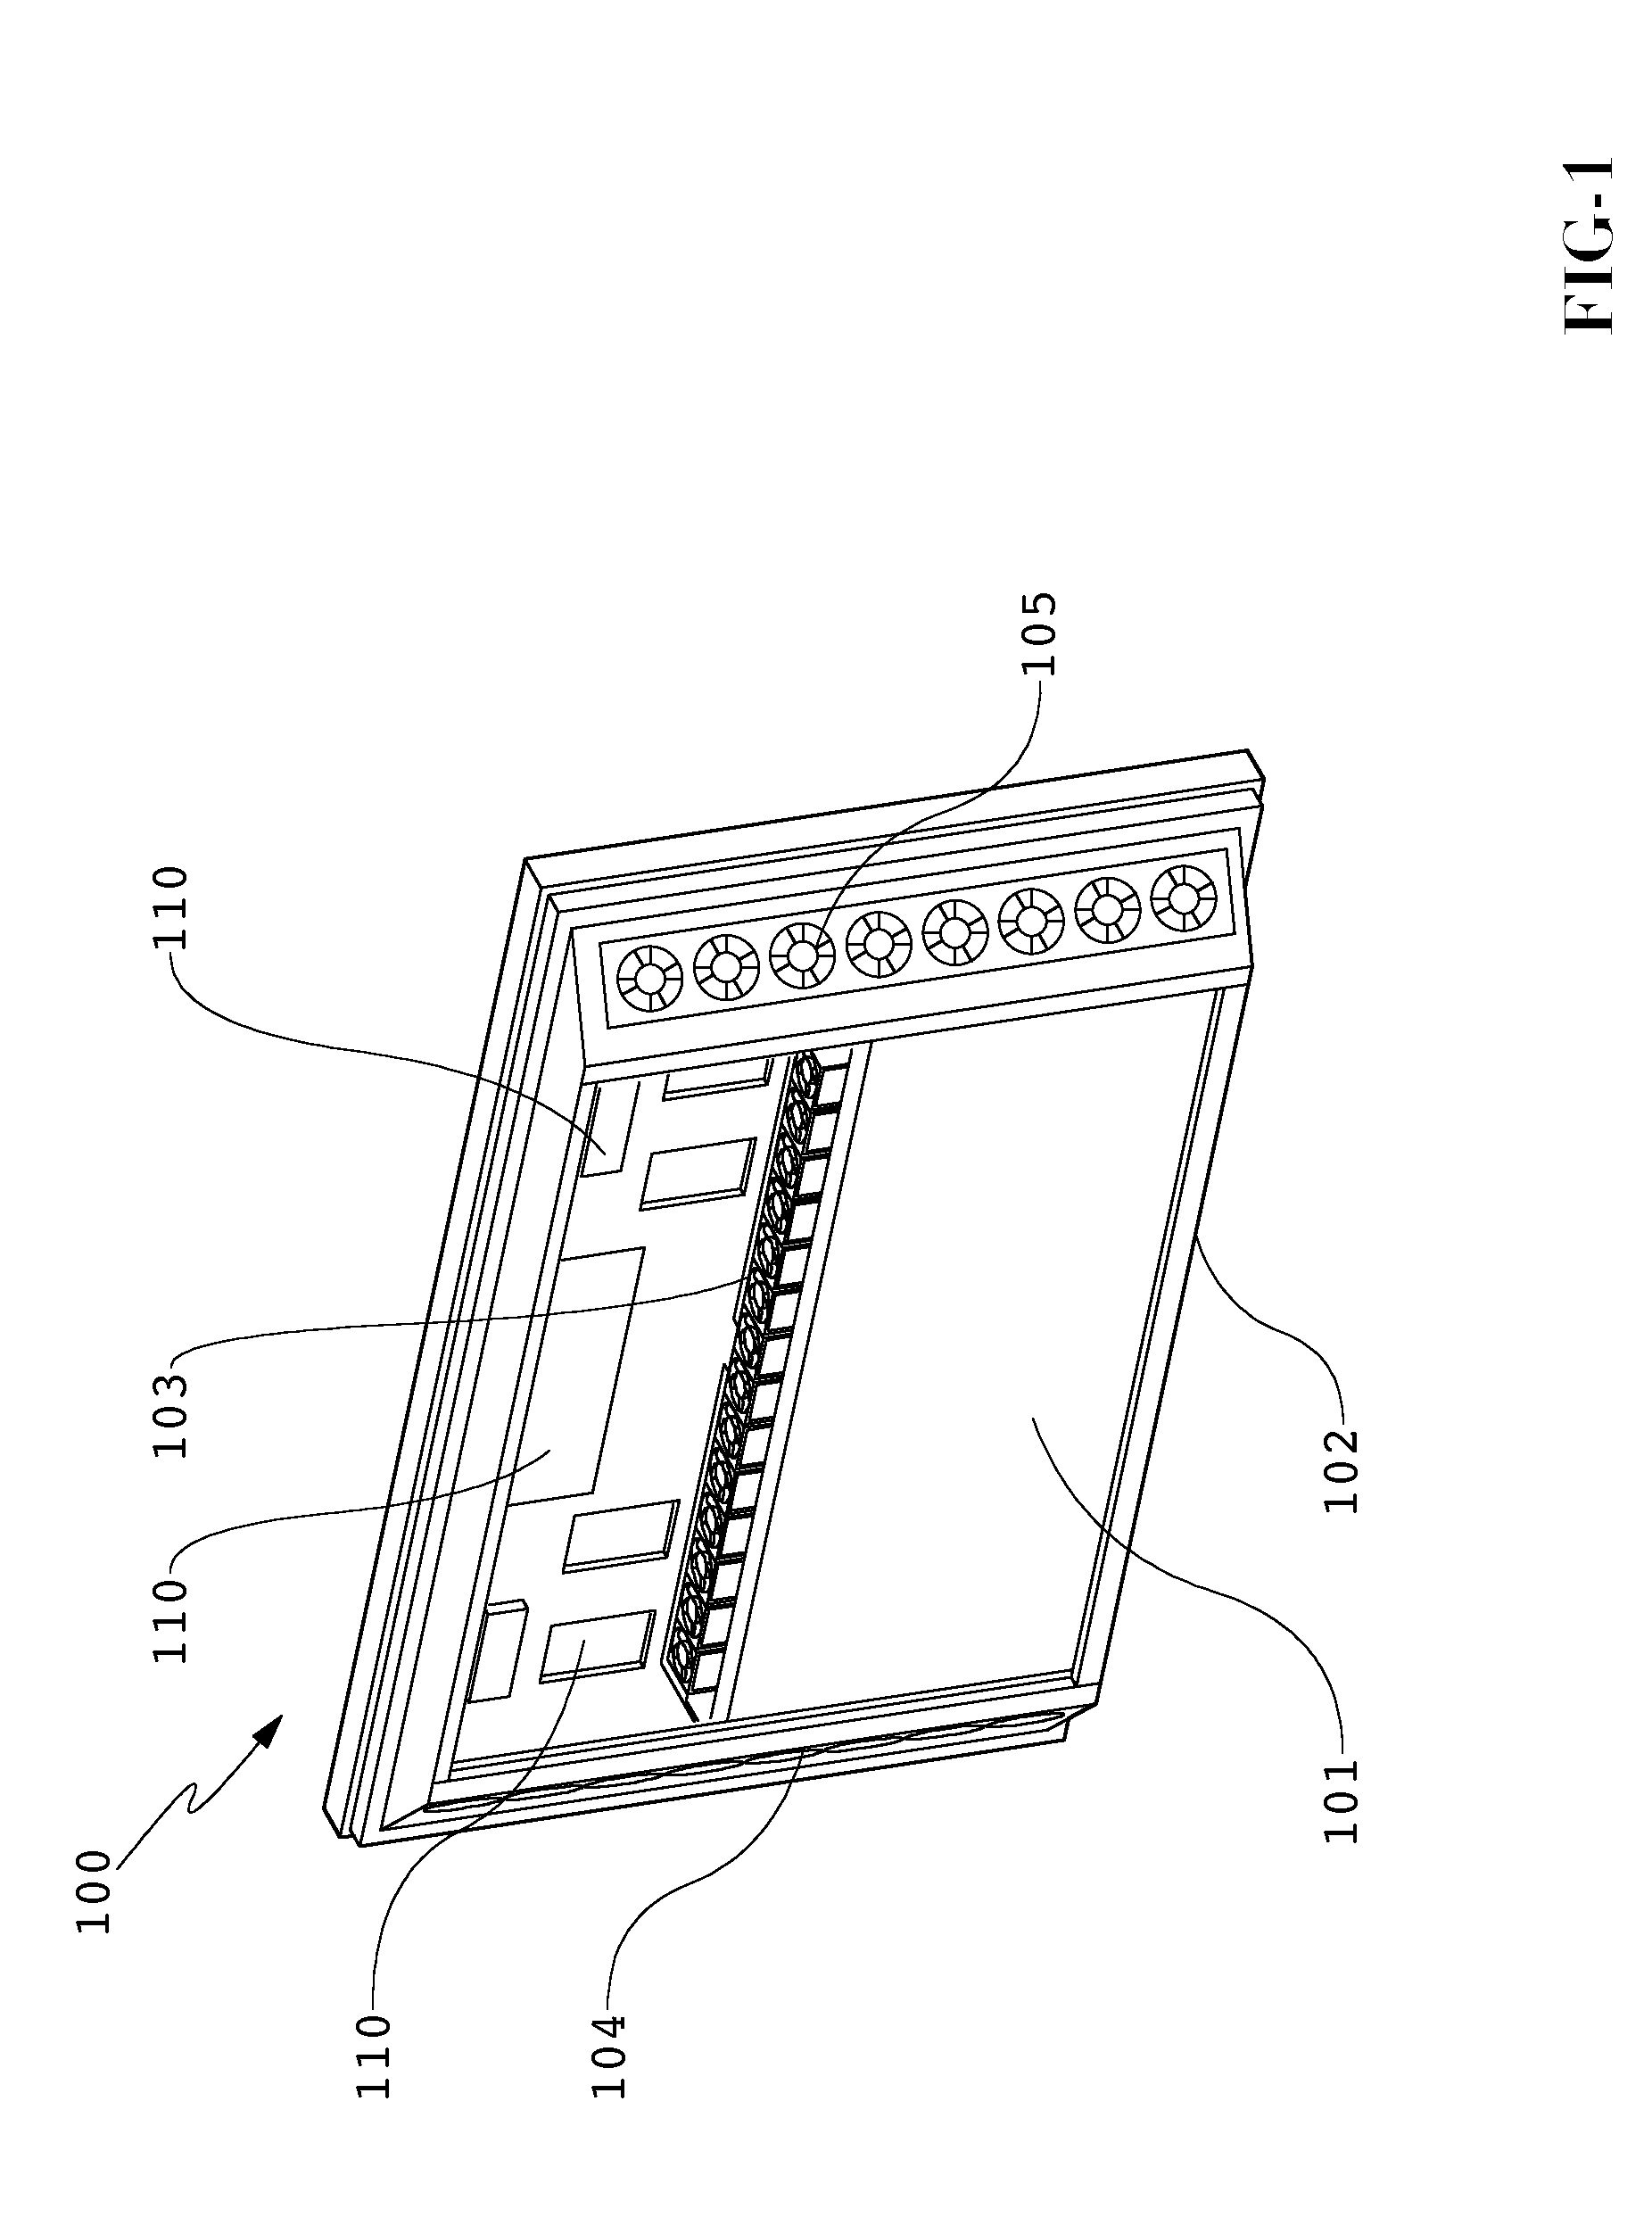 Heat Exchanger for an Electronic Display